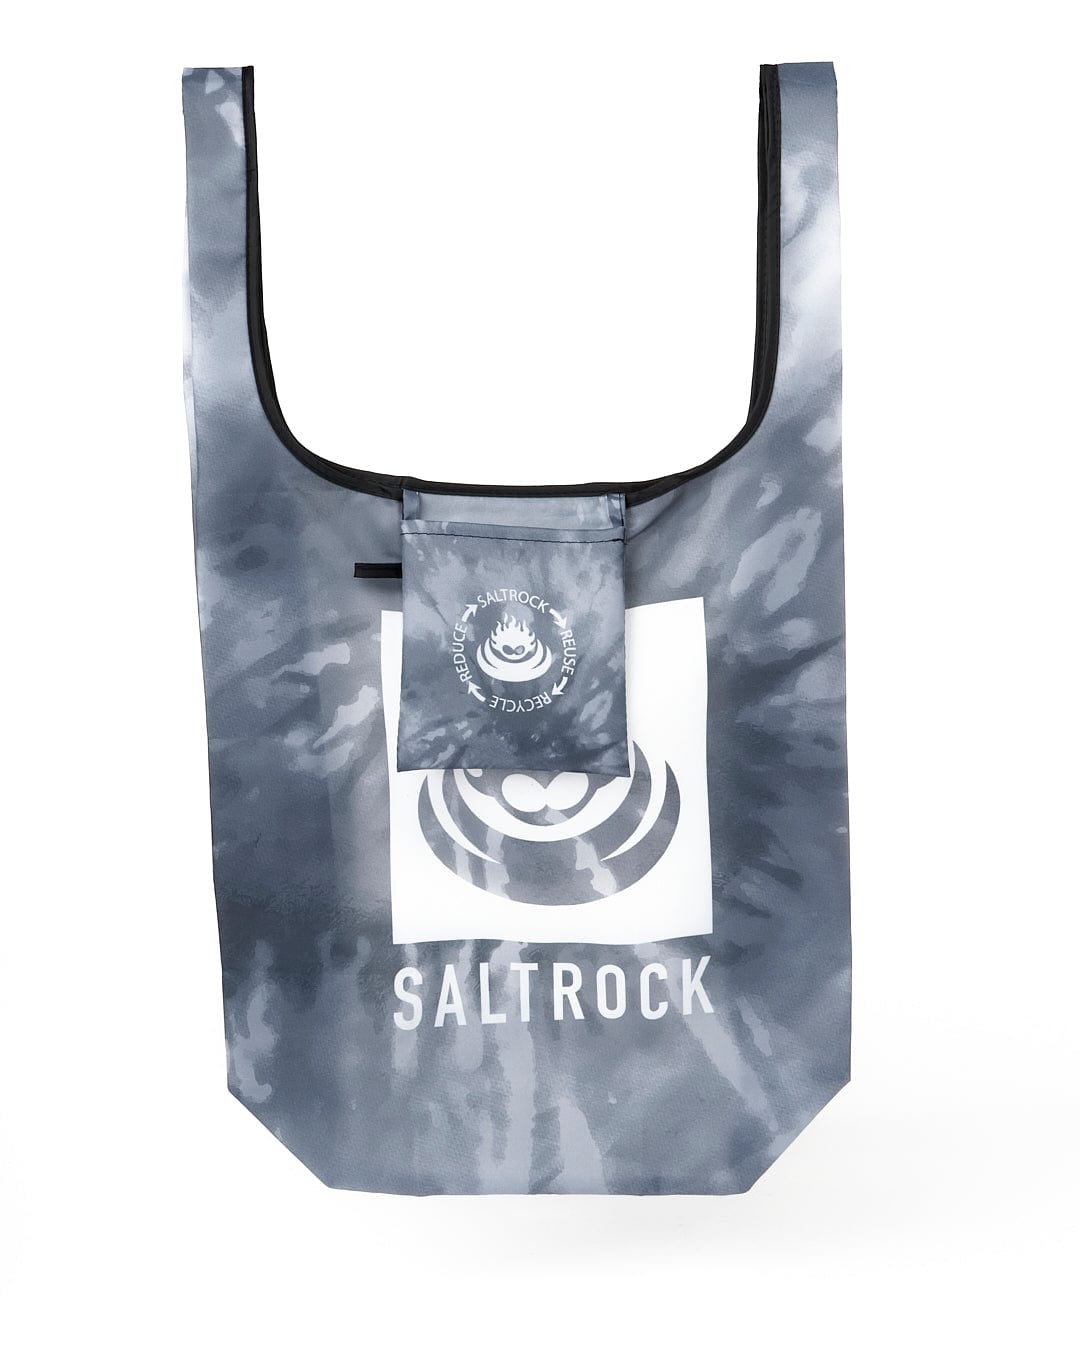 A sustainable Salvage - Recycled Shopper Bag - Dark Grey, made from recycled materials, featuring the Saltrock logo.